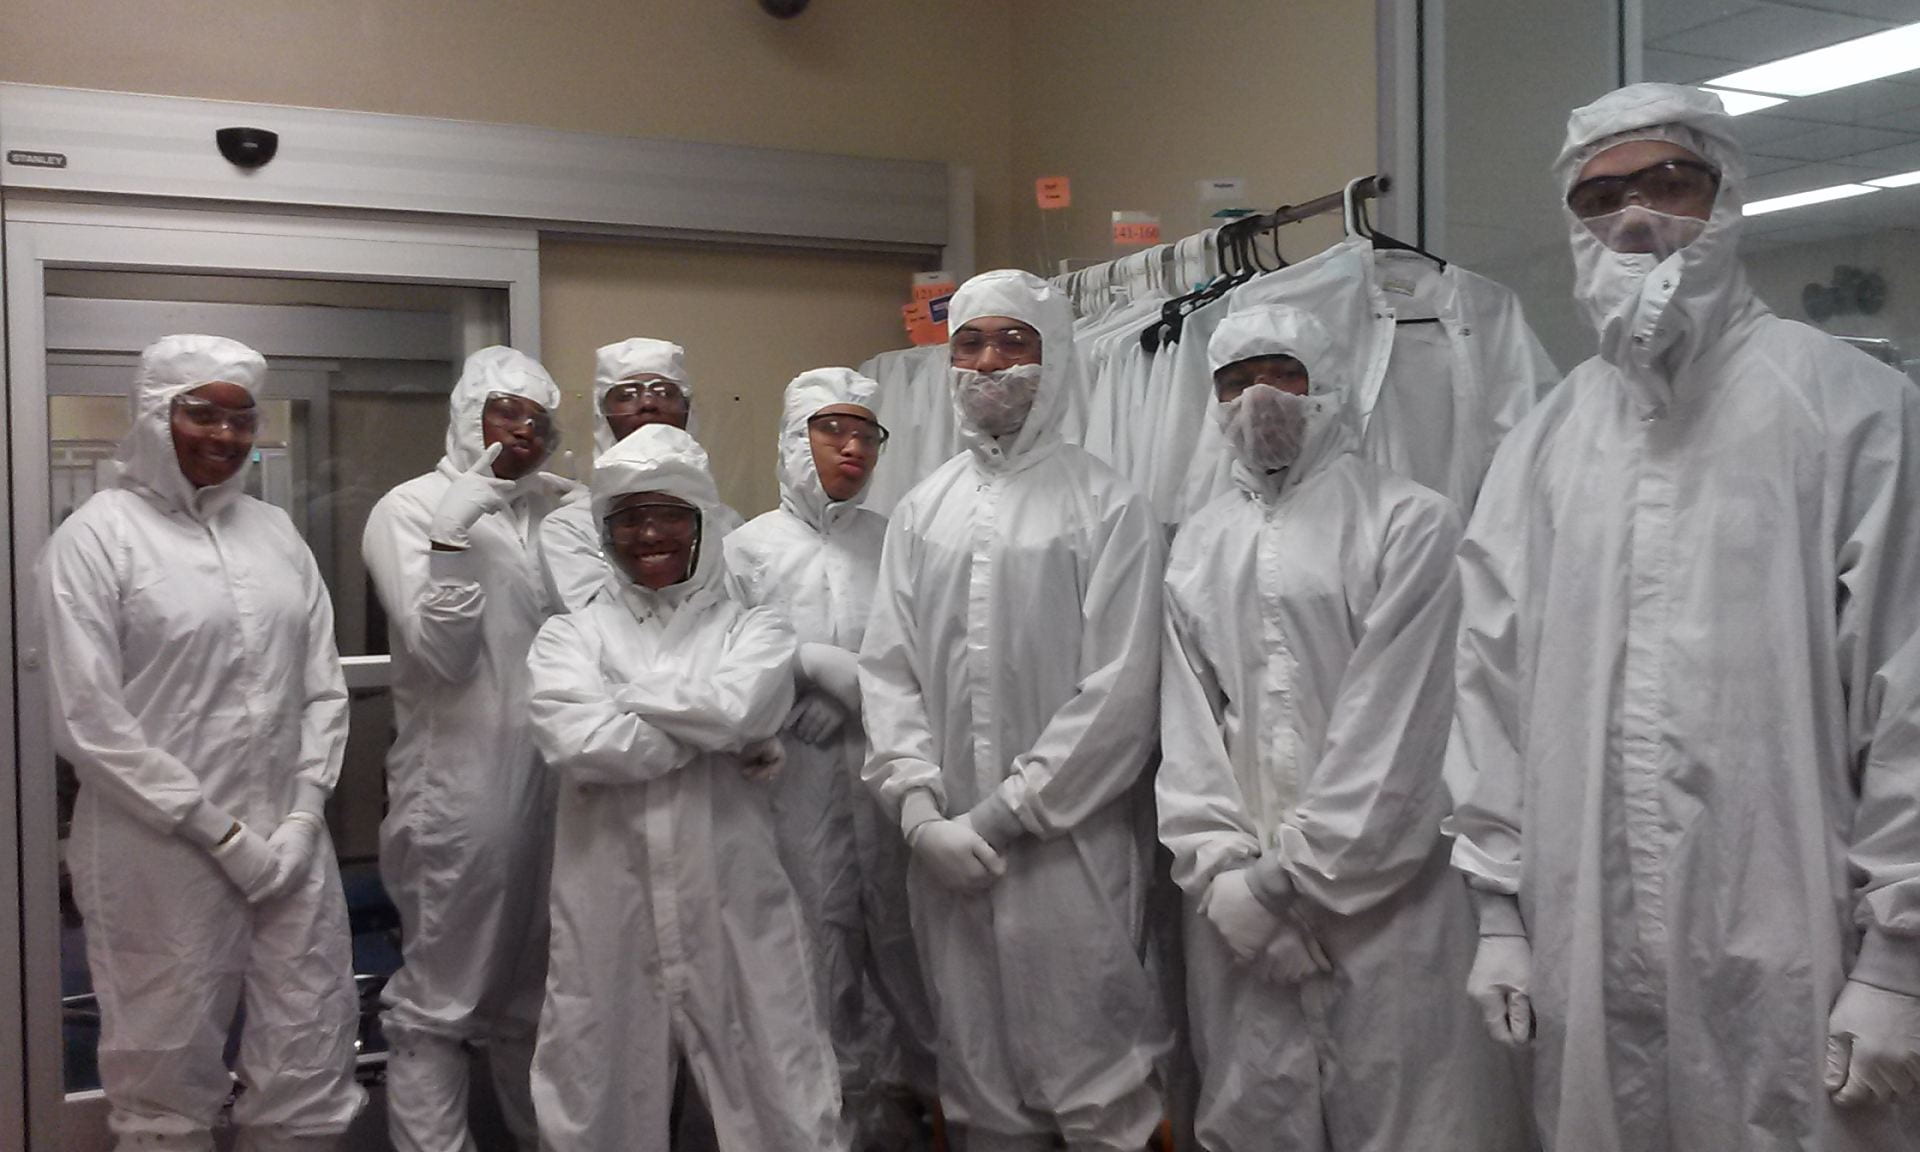 High school students in wearing cleanroom gowns